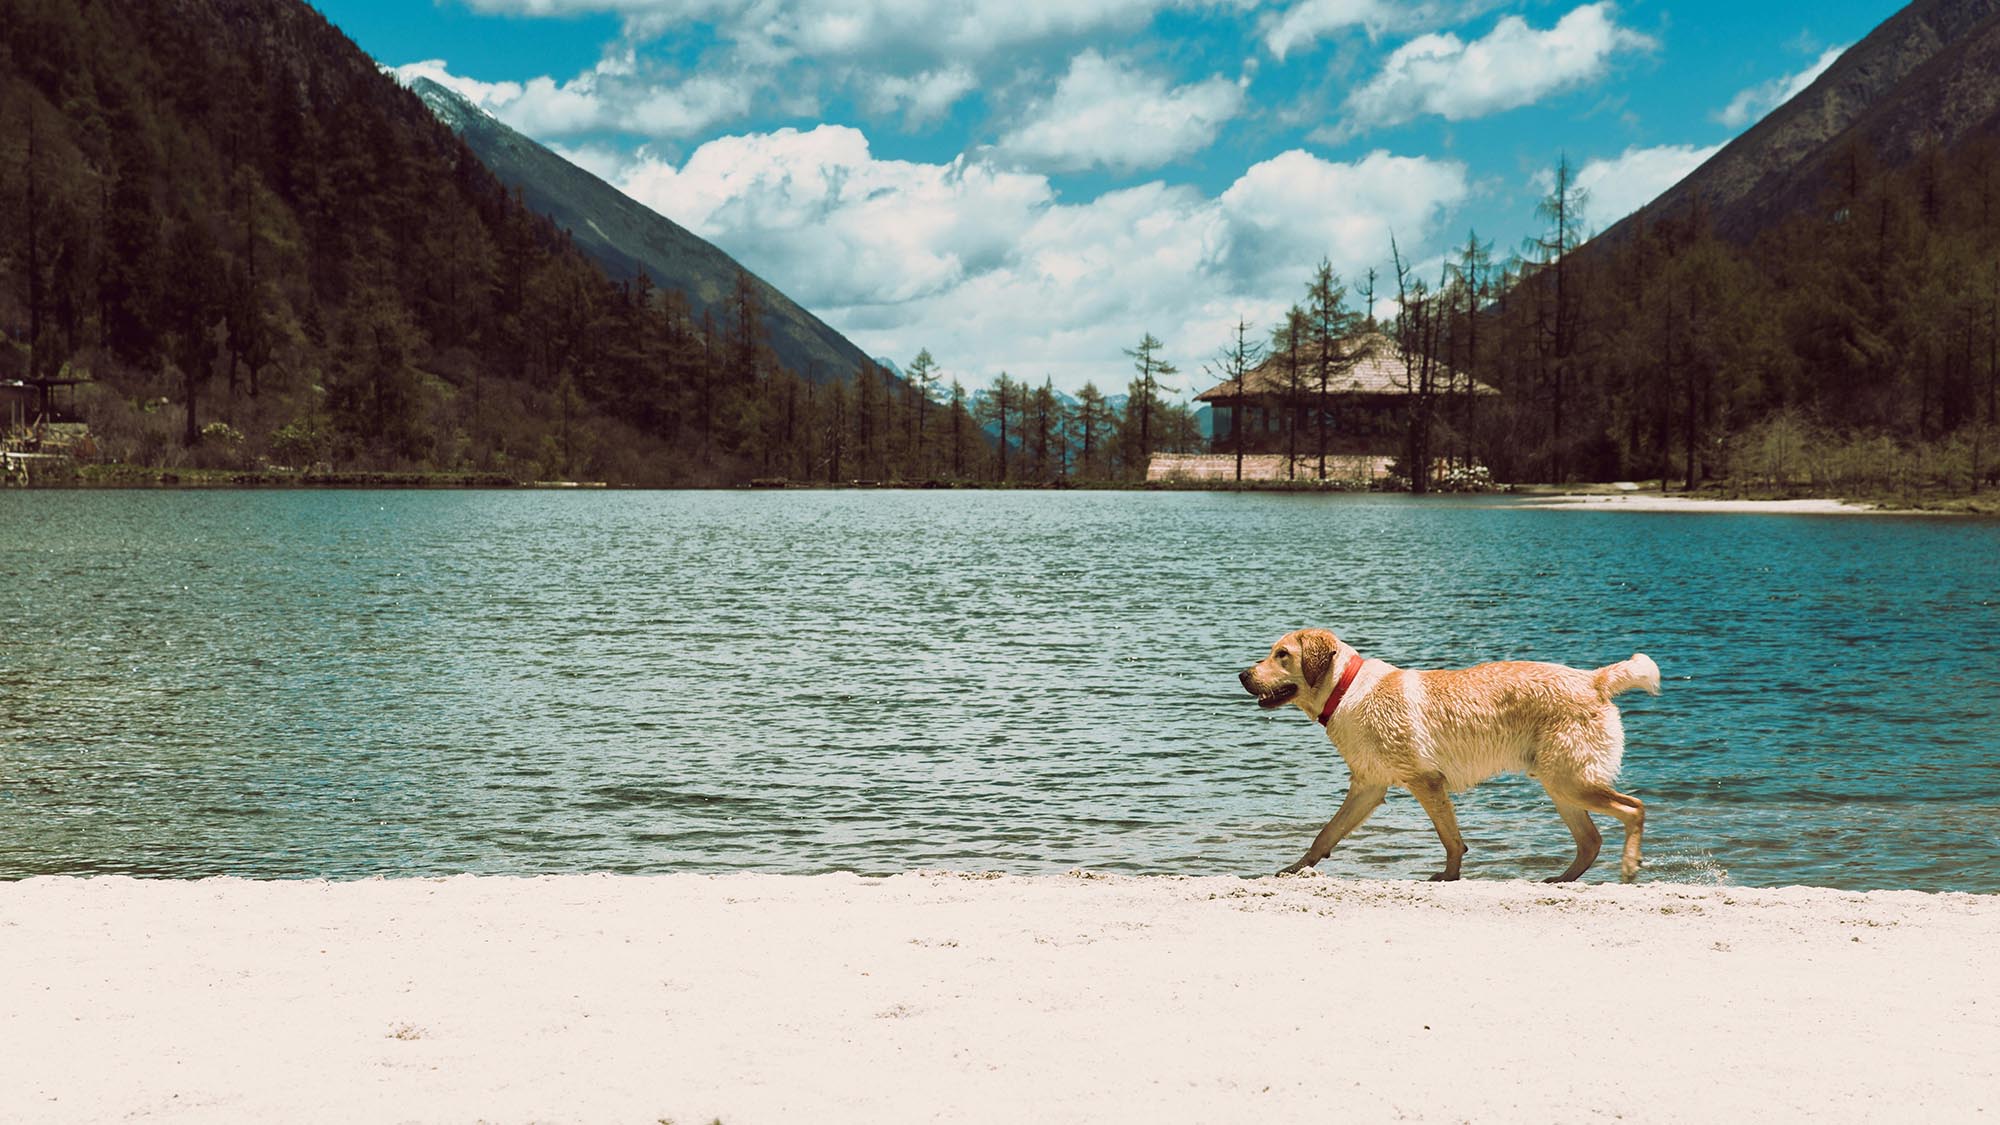 Energetic Labrador Retriever enjoying a sunny day at the lakeside, with lush green mountains in the background and clear blue skies overhead.